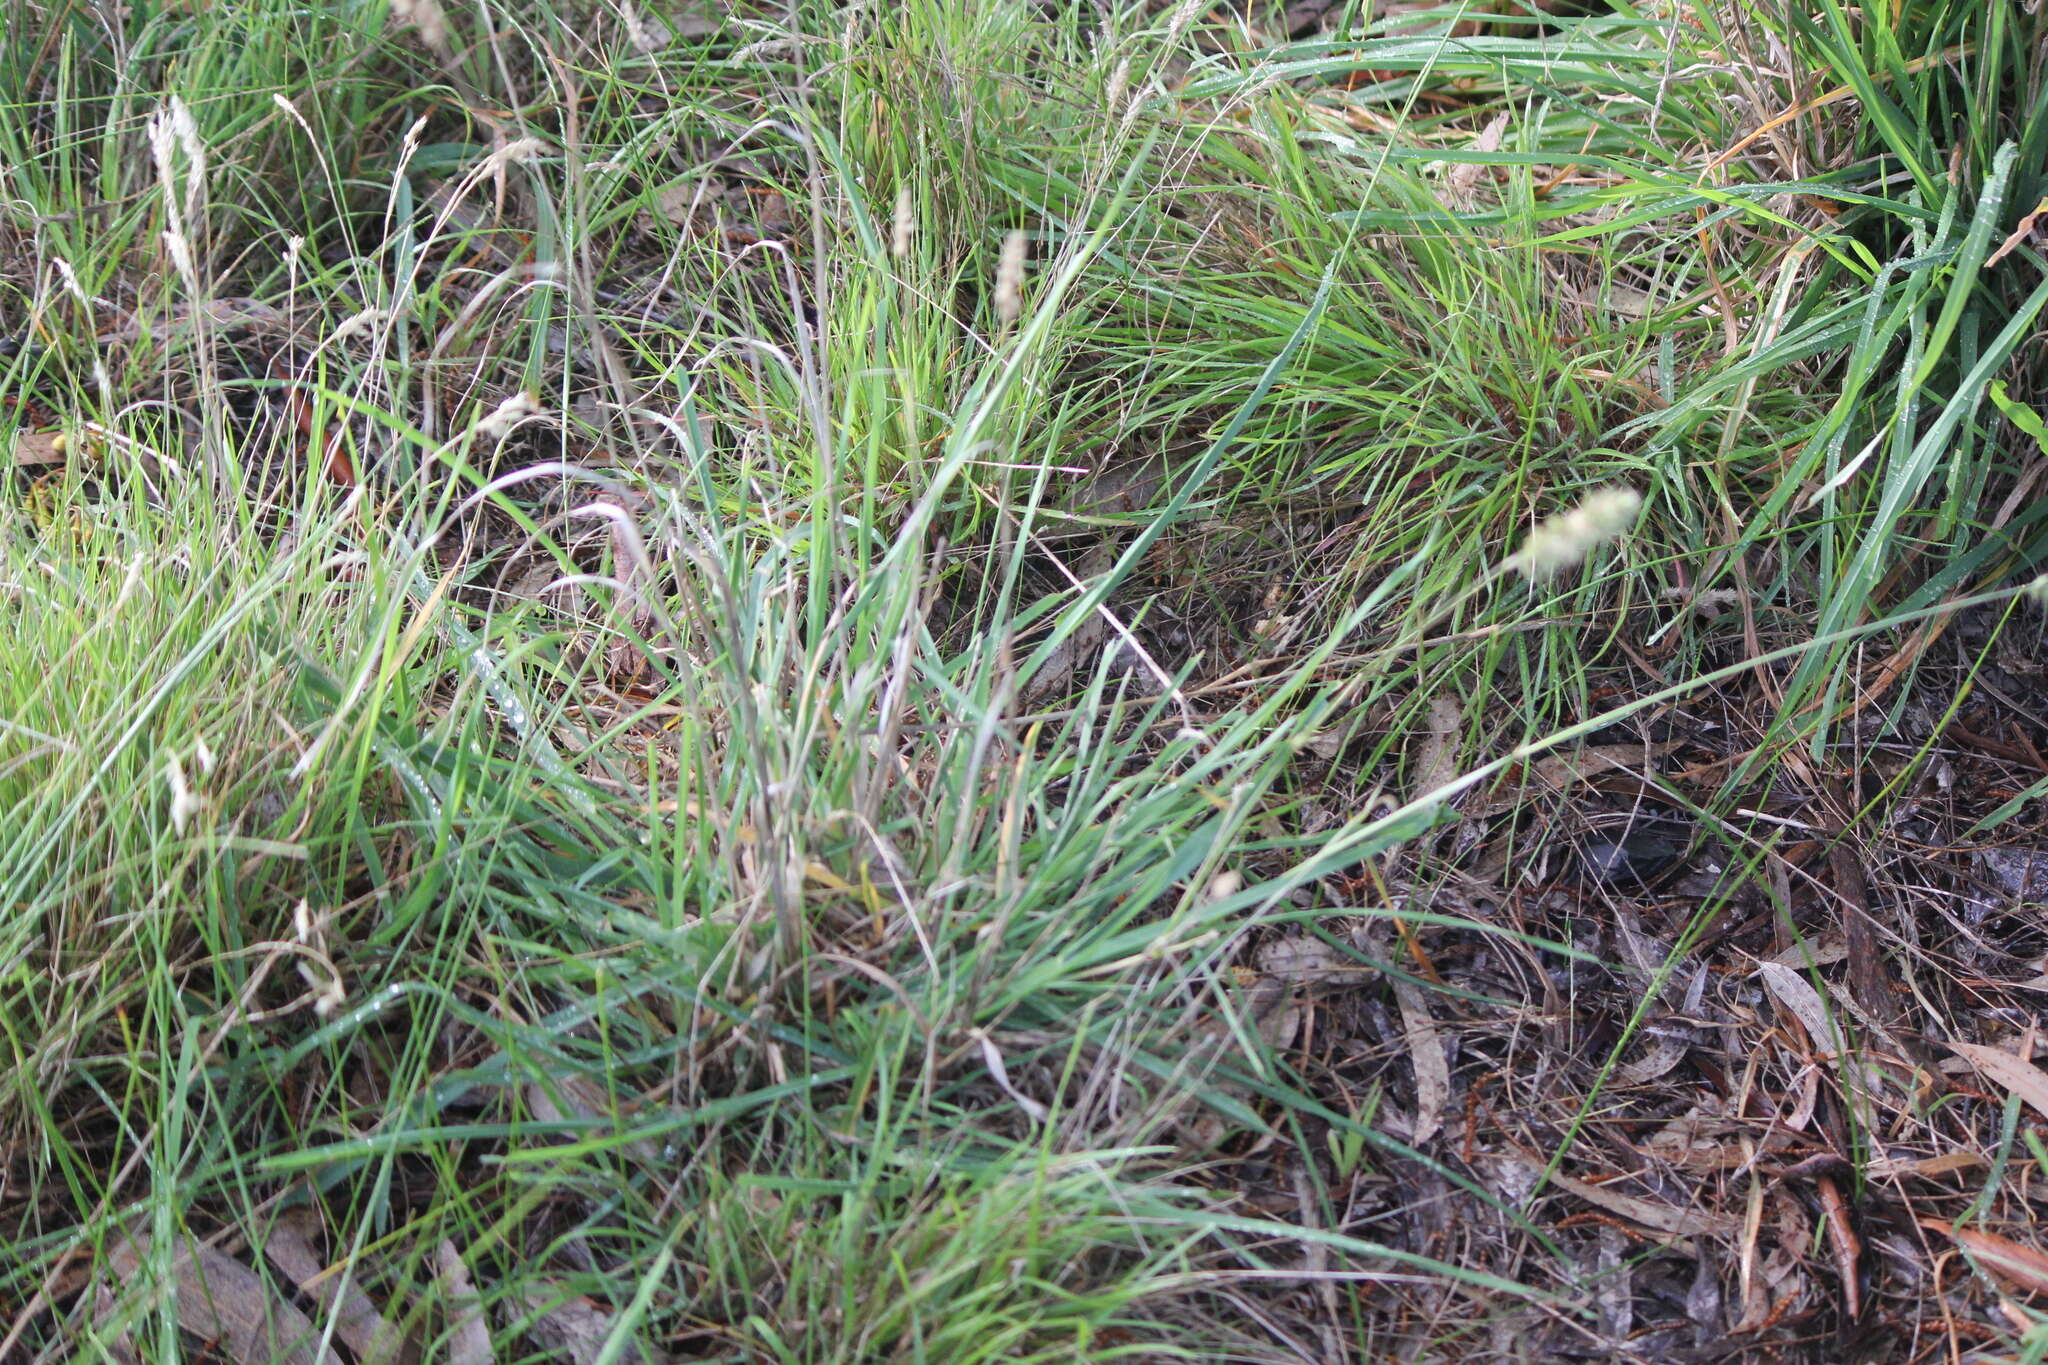 Image of Cape ricegrass